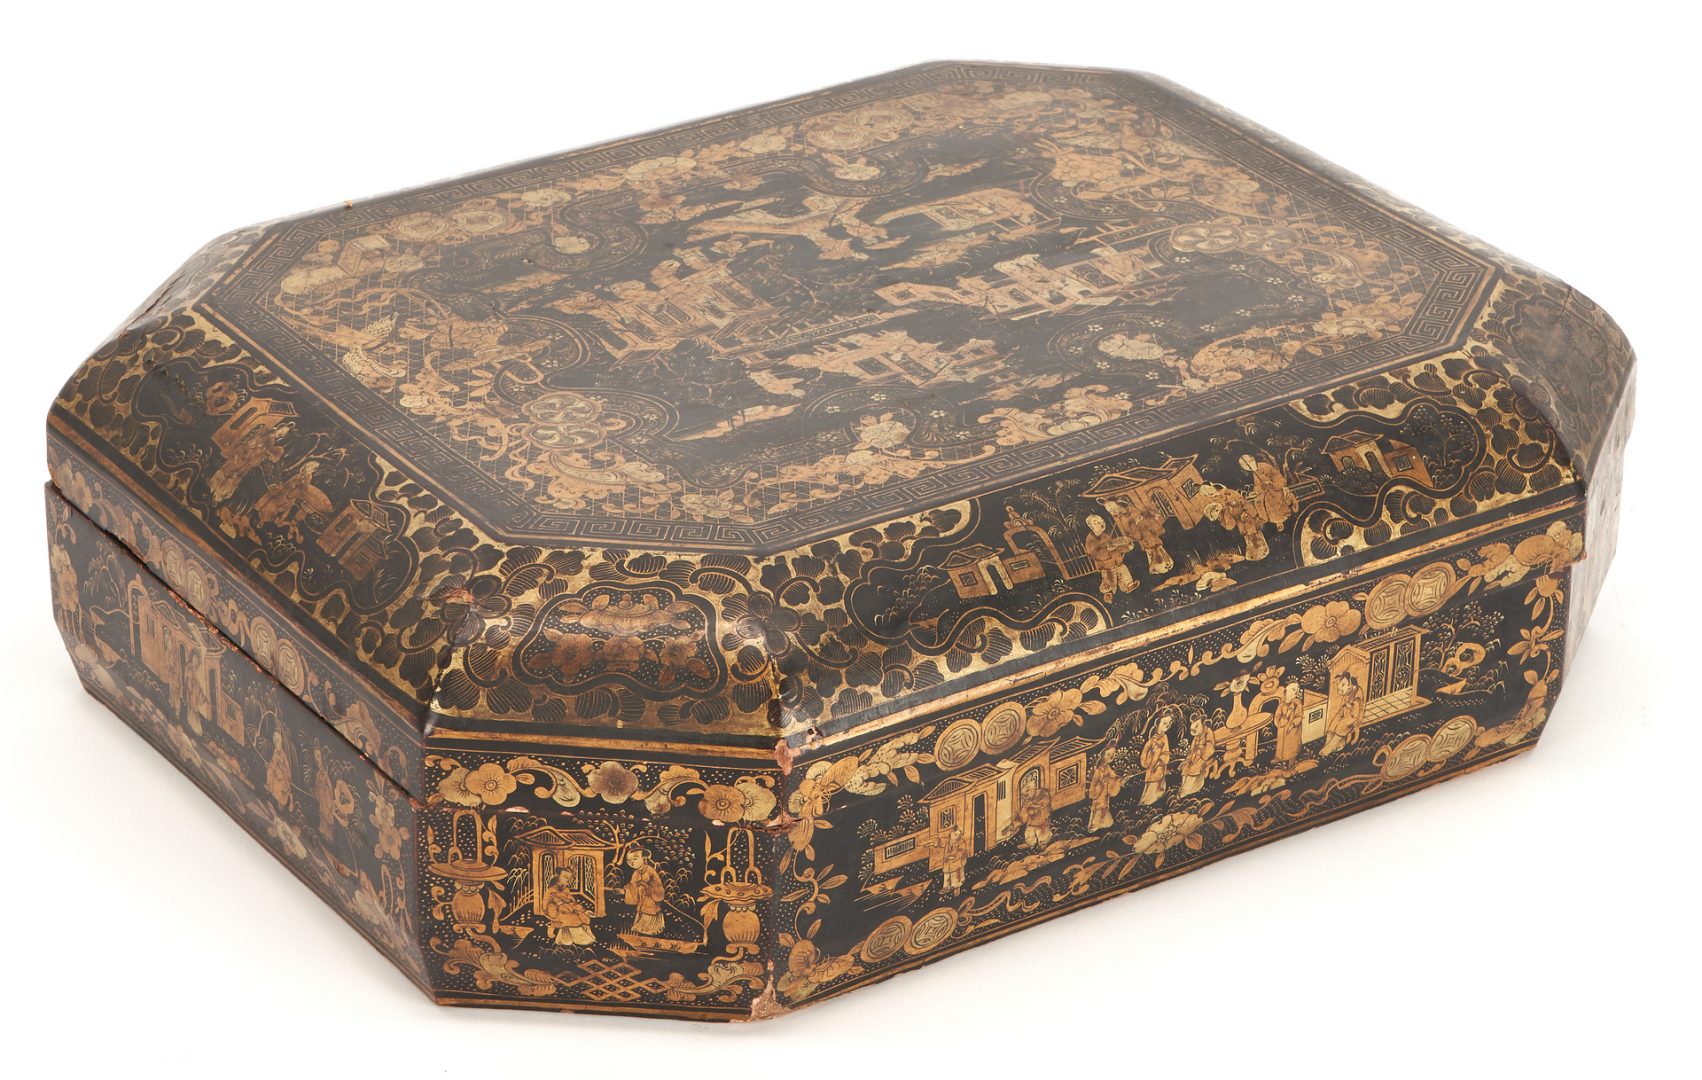 Lot 13: Two (2) Chinese Export Lacquer Boxes